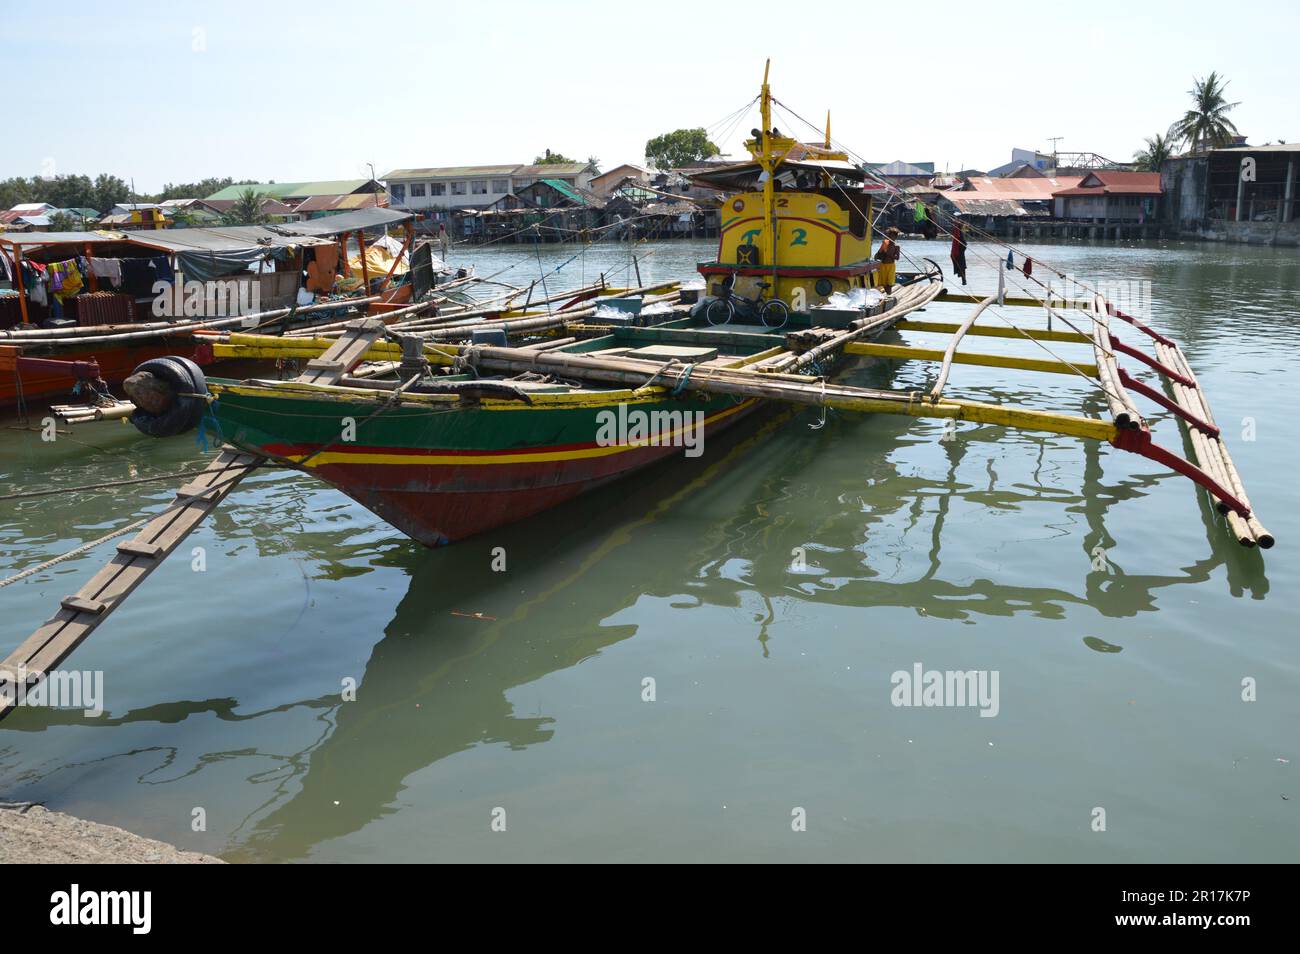 The Philippines, Samar Island, Calbayog: wooden fishing boats with typical  outriggers on the River Calbayog Stock Photo - Alamy